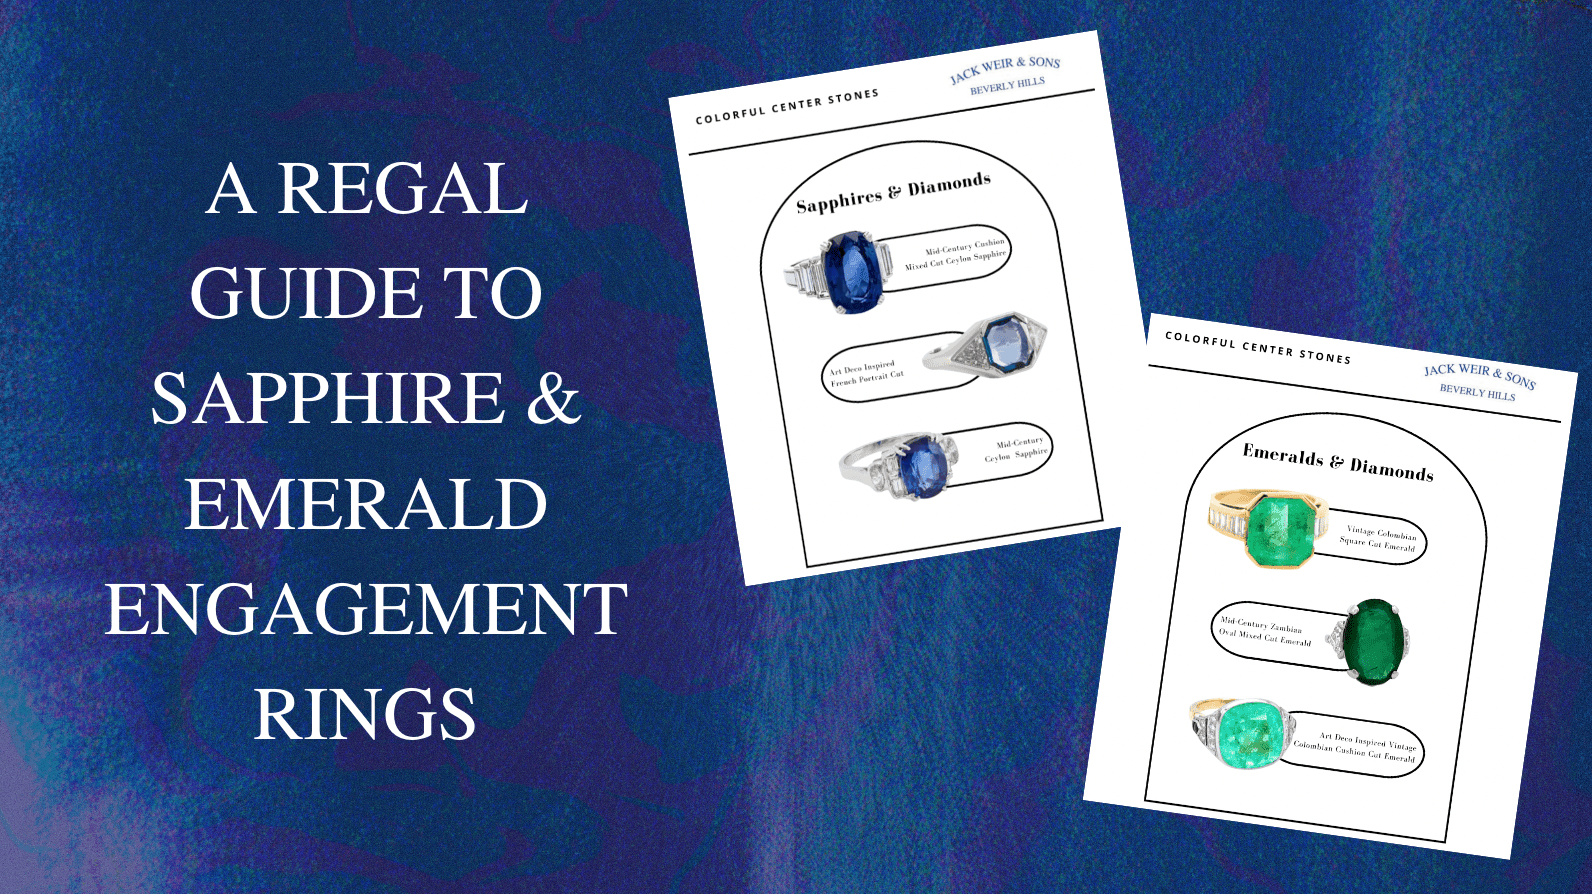 A Regal Guide to Sapphire and Emerald Engagement Rings - Jack Weir & Sons